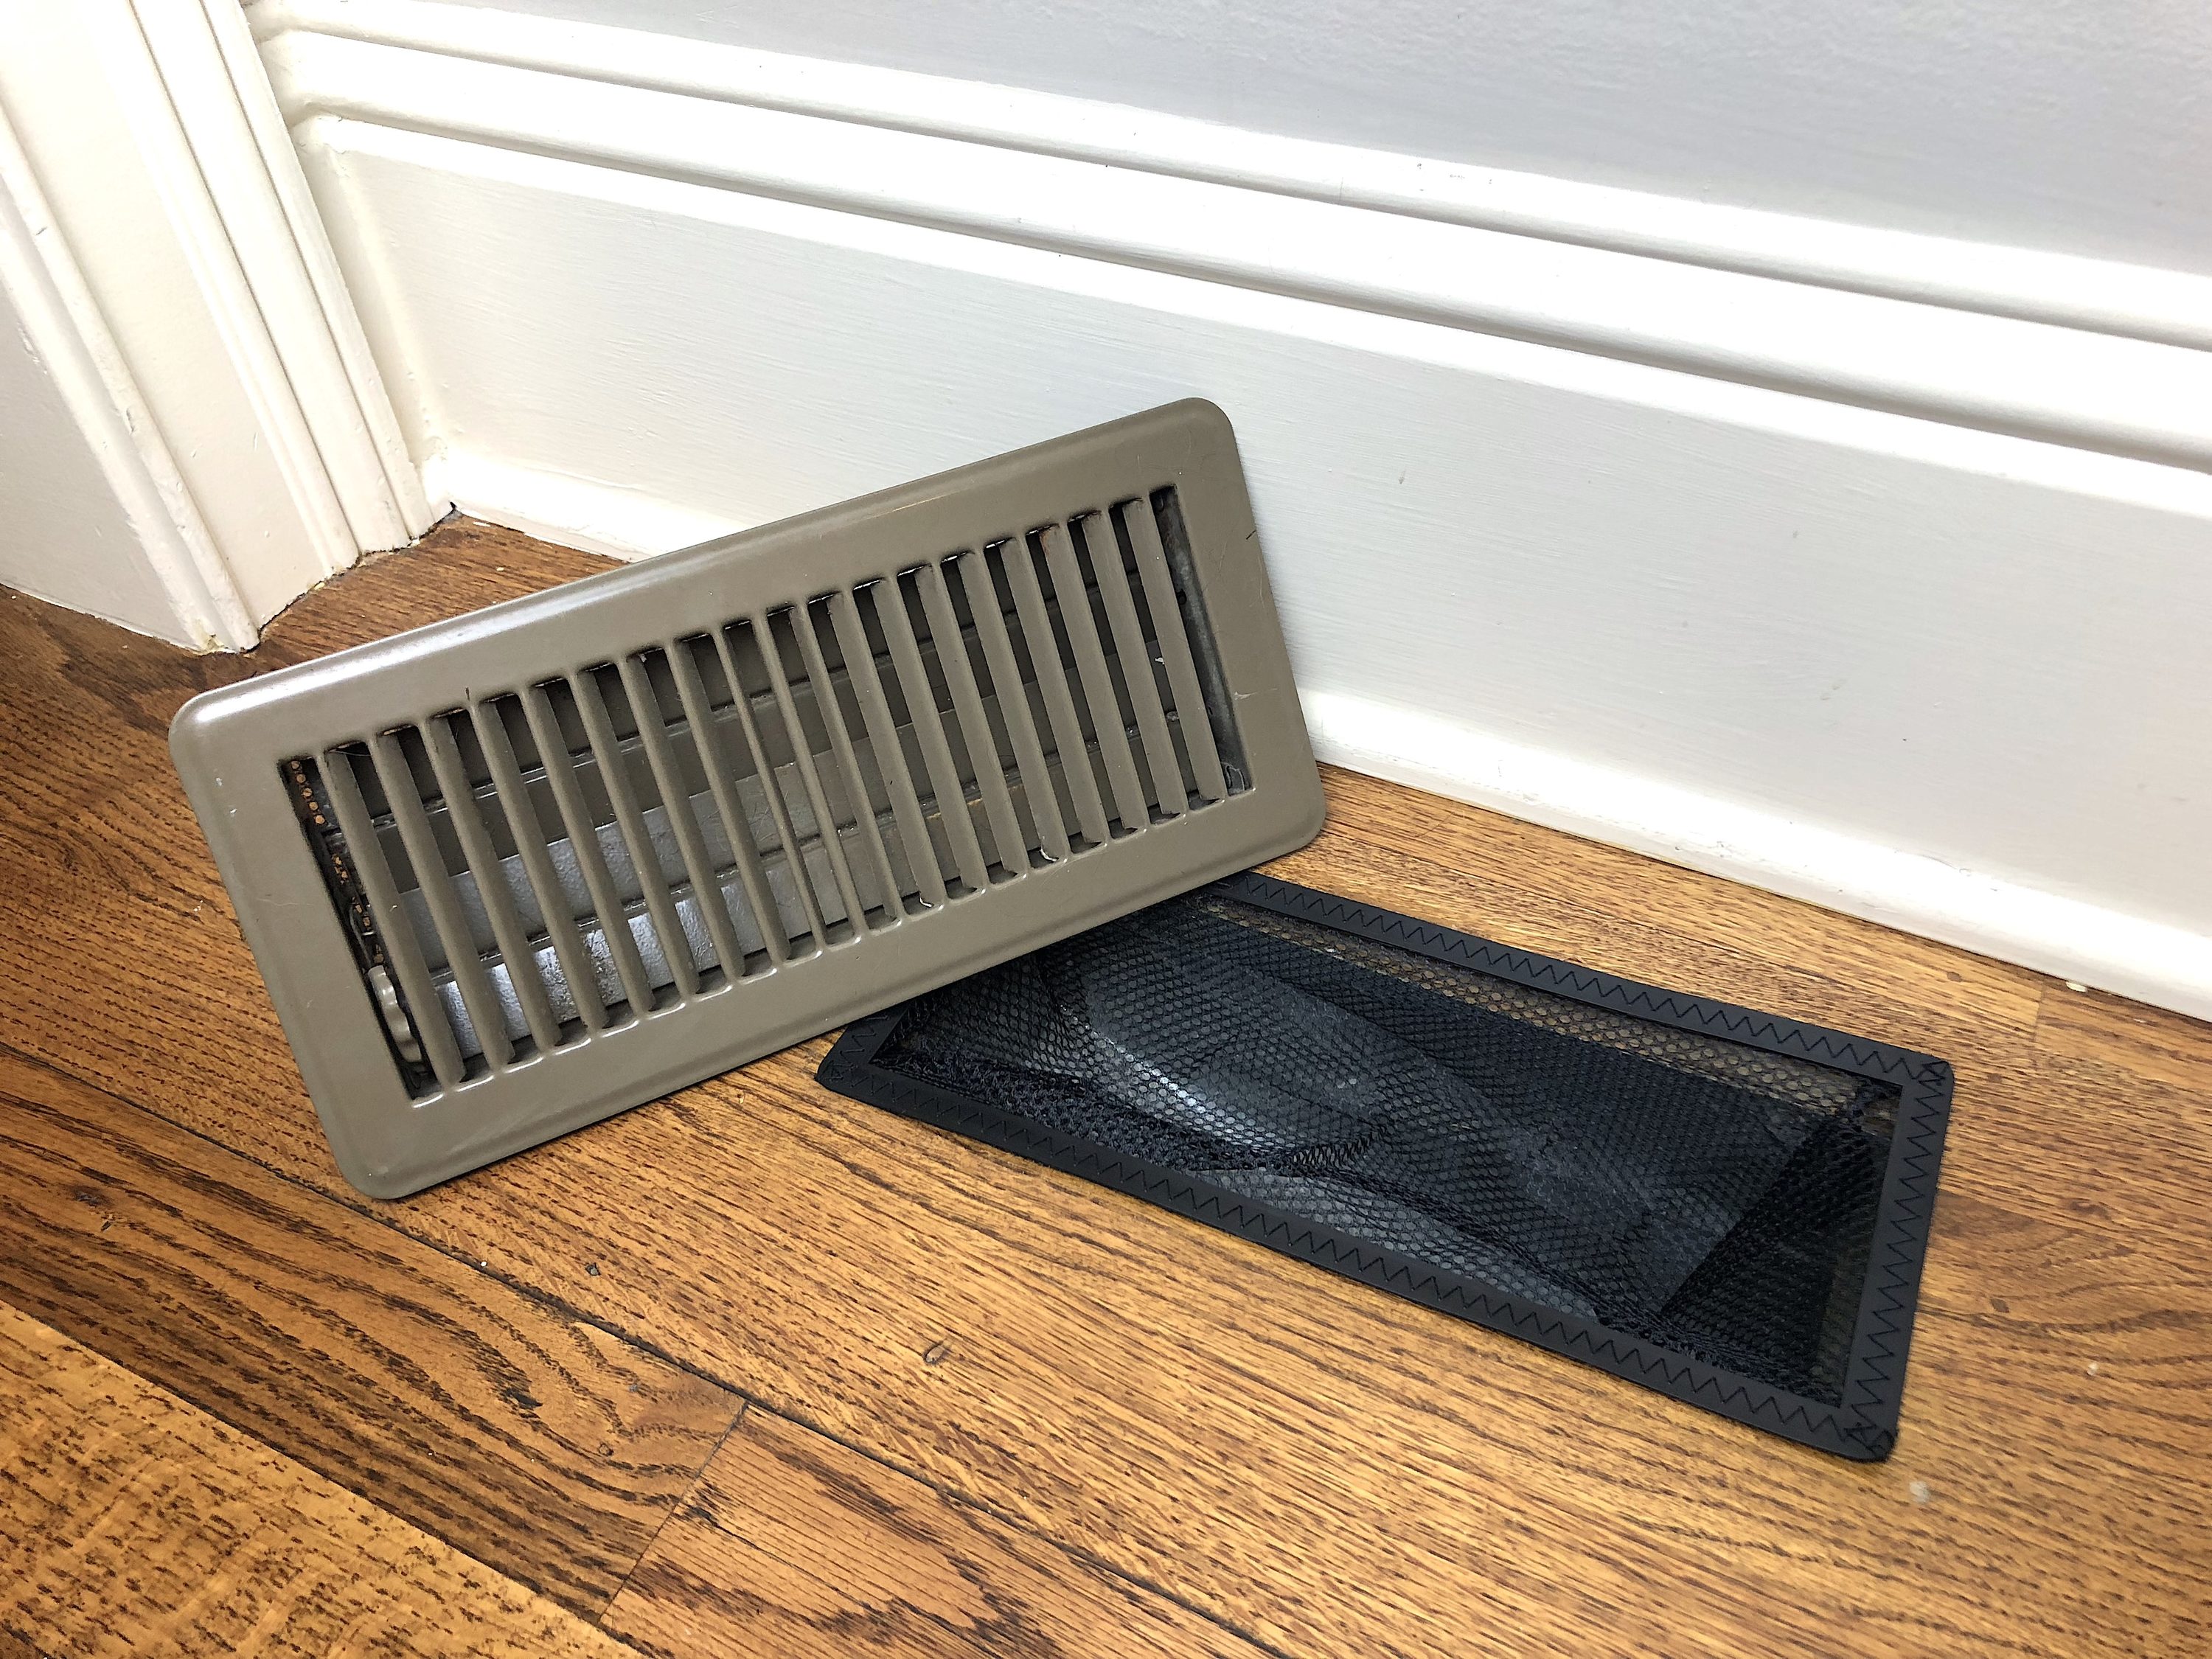 Floor Register Vent Cover- 4x10 Magnetic Air Vent Screen Mesh Cover,  Perfect for Wall/Ceiling/Floor Air Vent Filters (4-Packs)